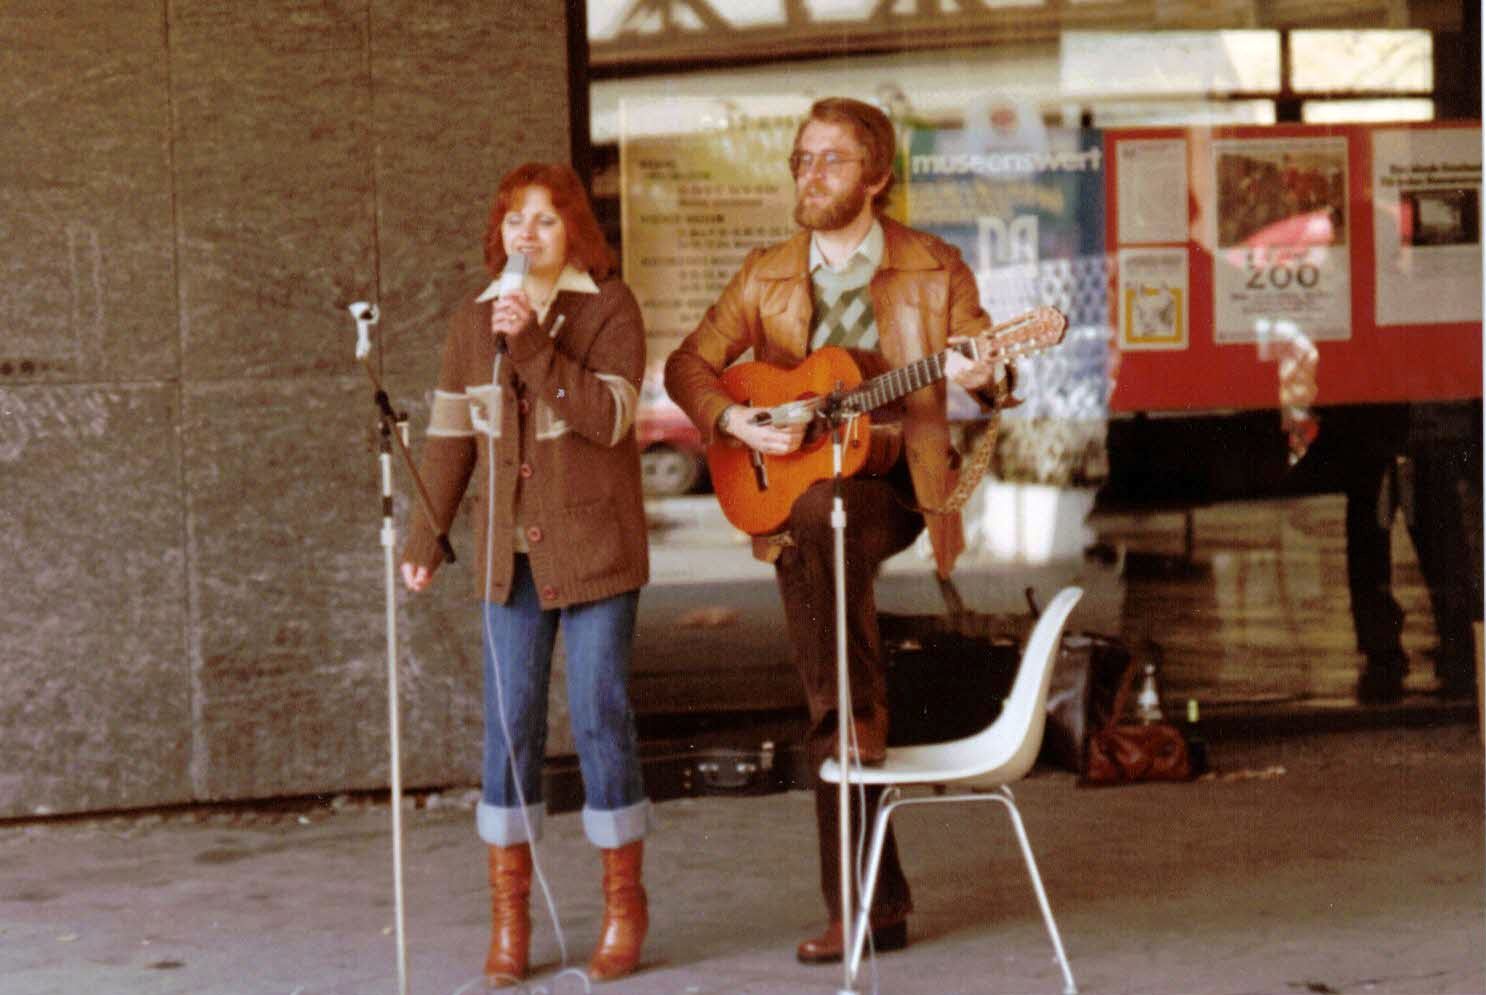 singing in the street